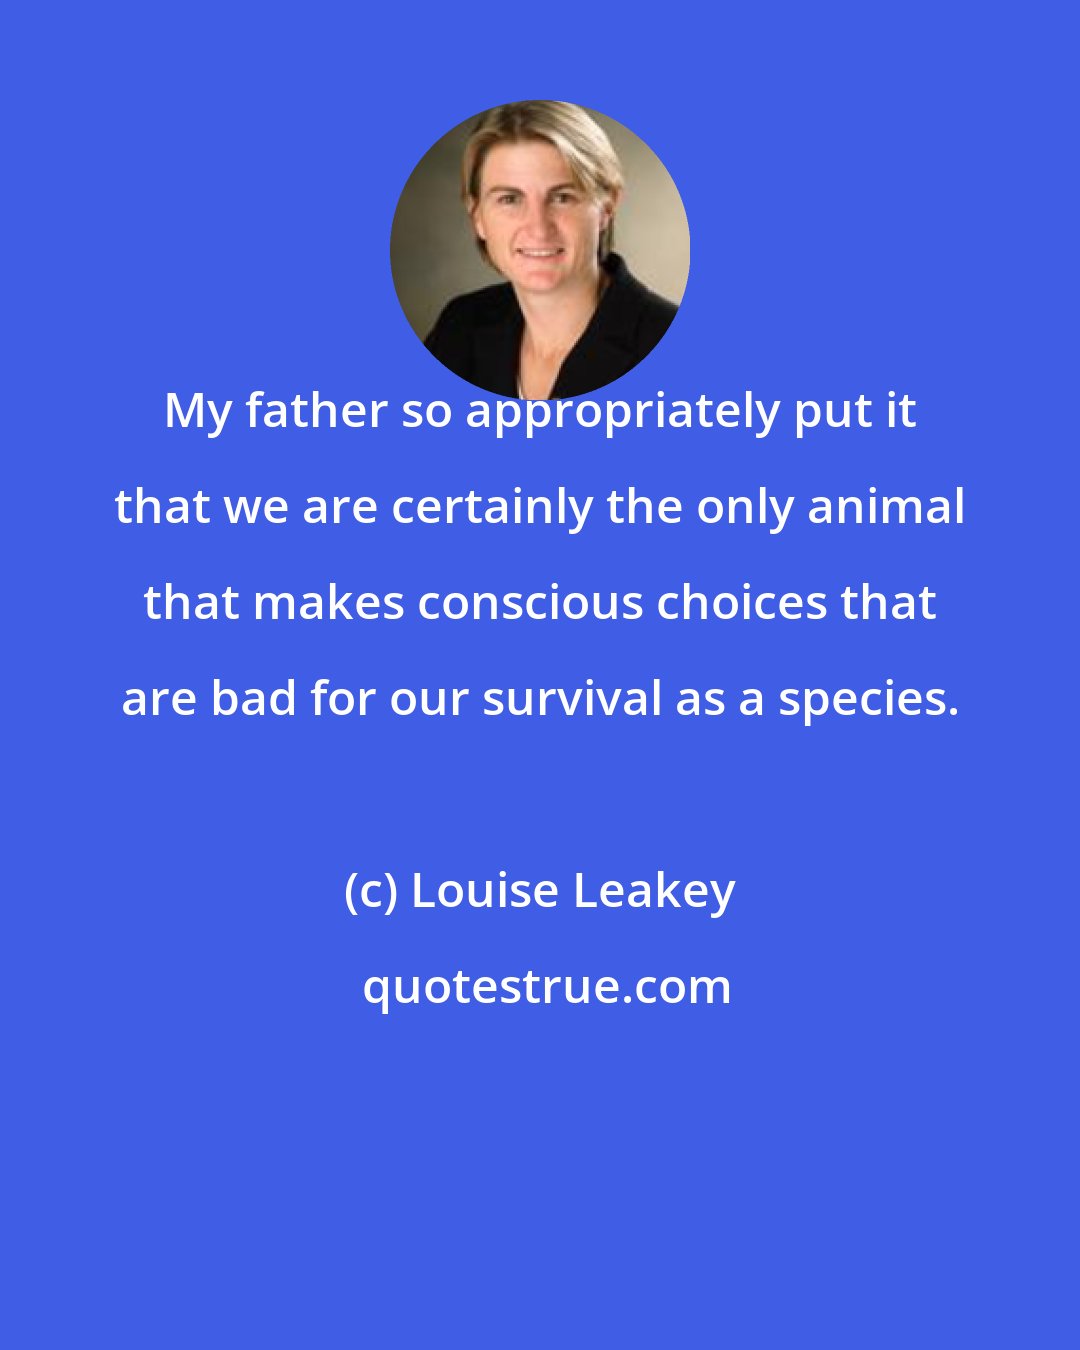 Louise Leakey: My father so appropriately put it that we are certainly the only animal that makes conscious choices that are bad for our survival as a species.